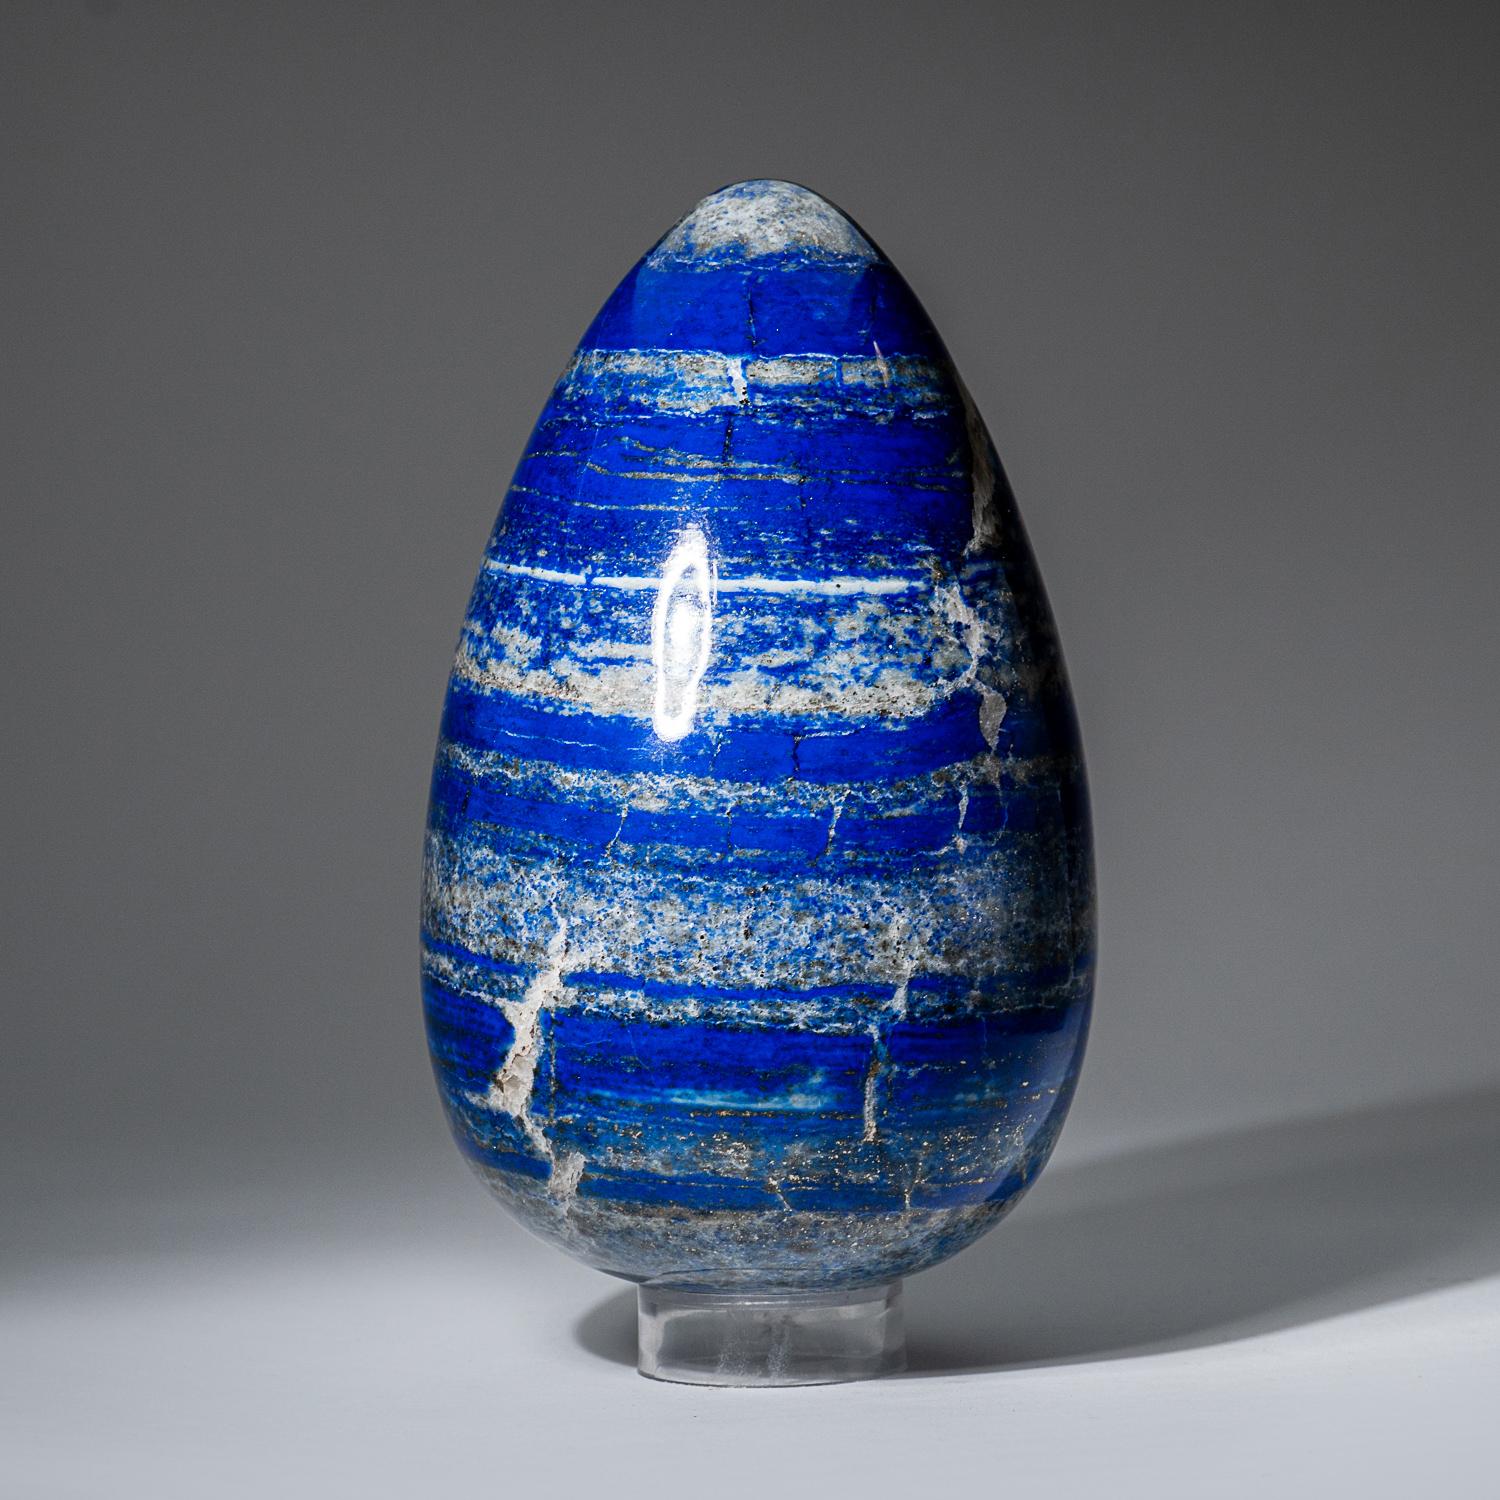 Contemporary Genuine Polished Lapis Lazuli Egg from Afghanistan '7.9 lbs' For Sale